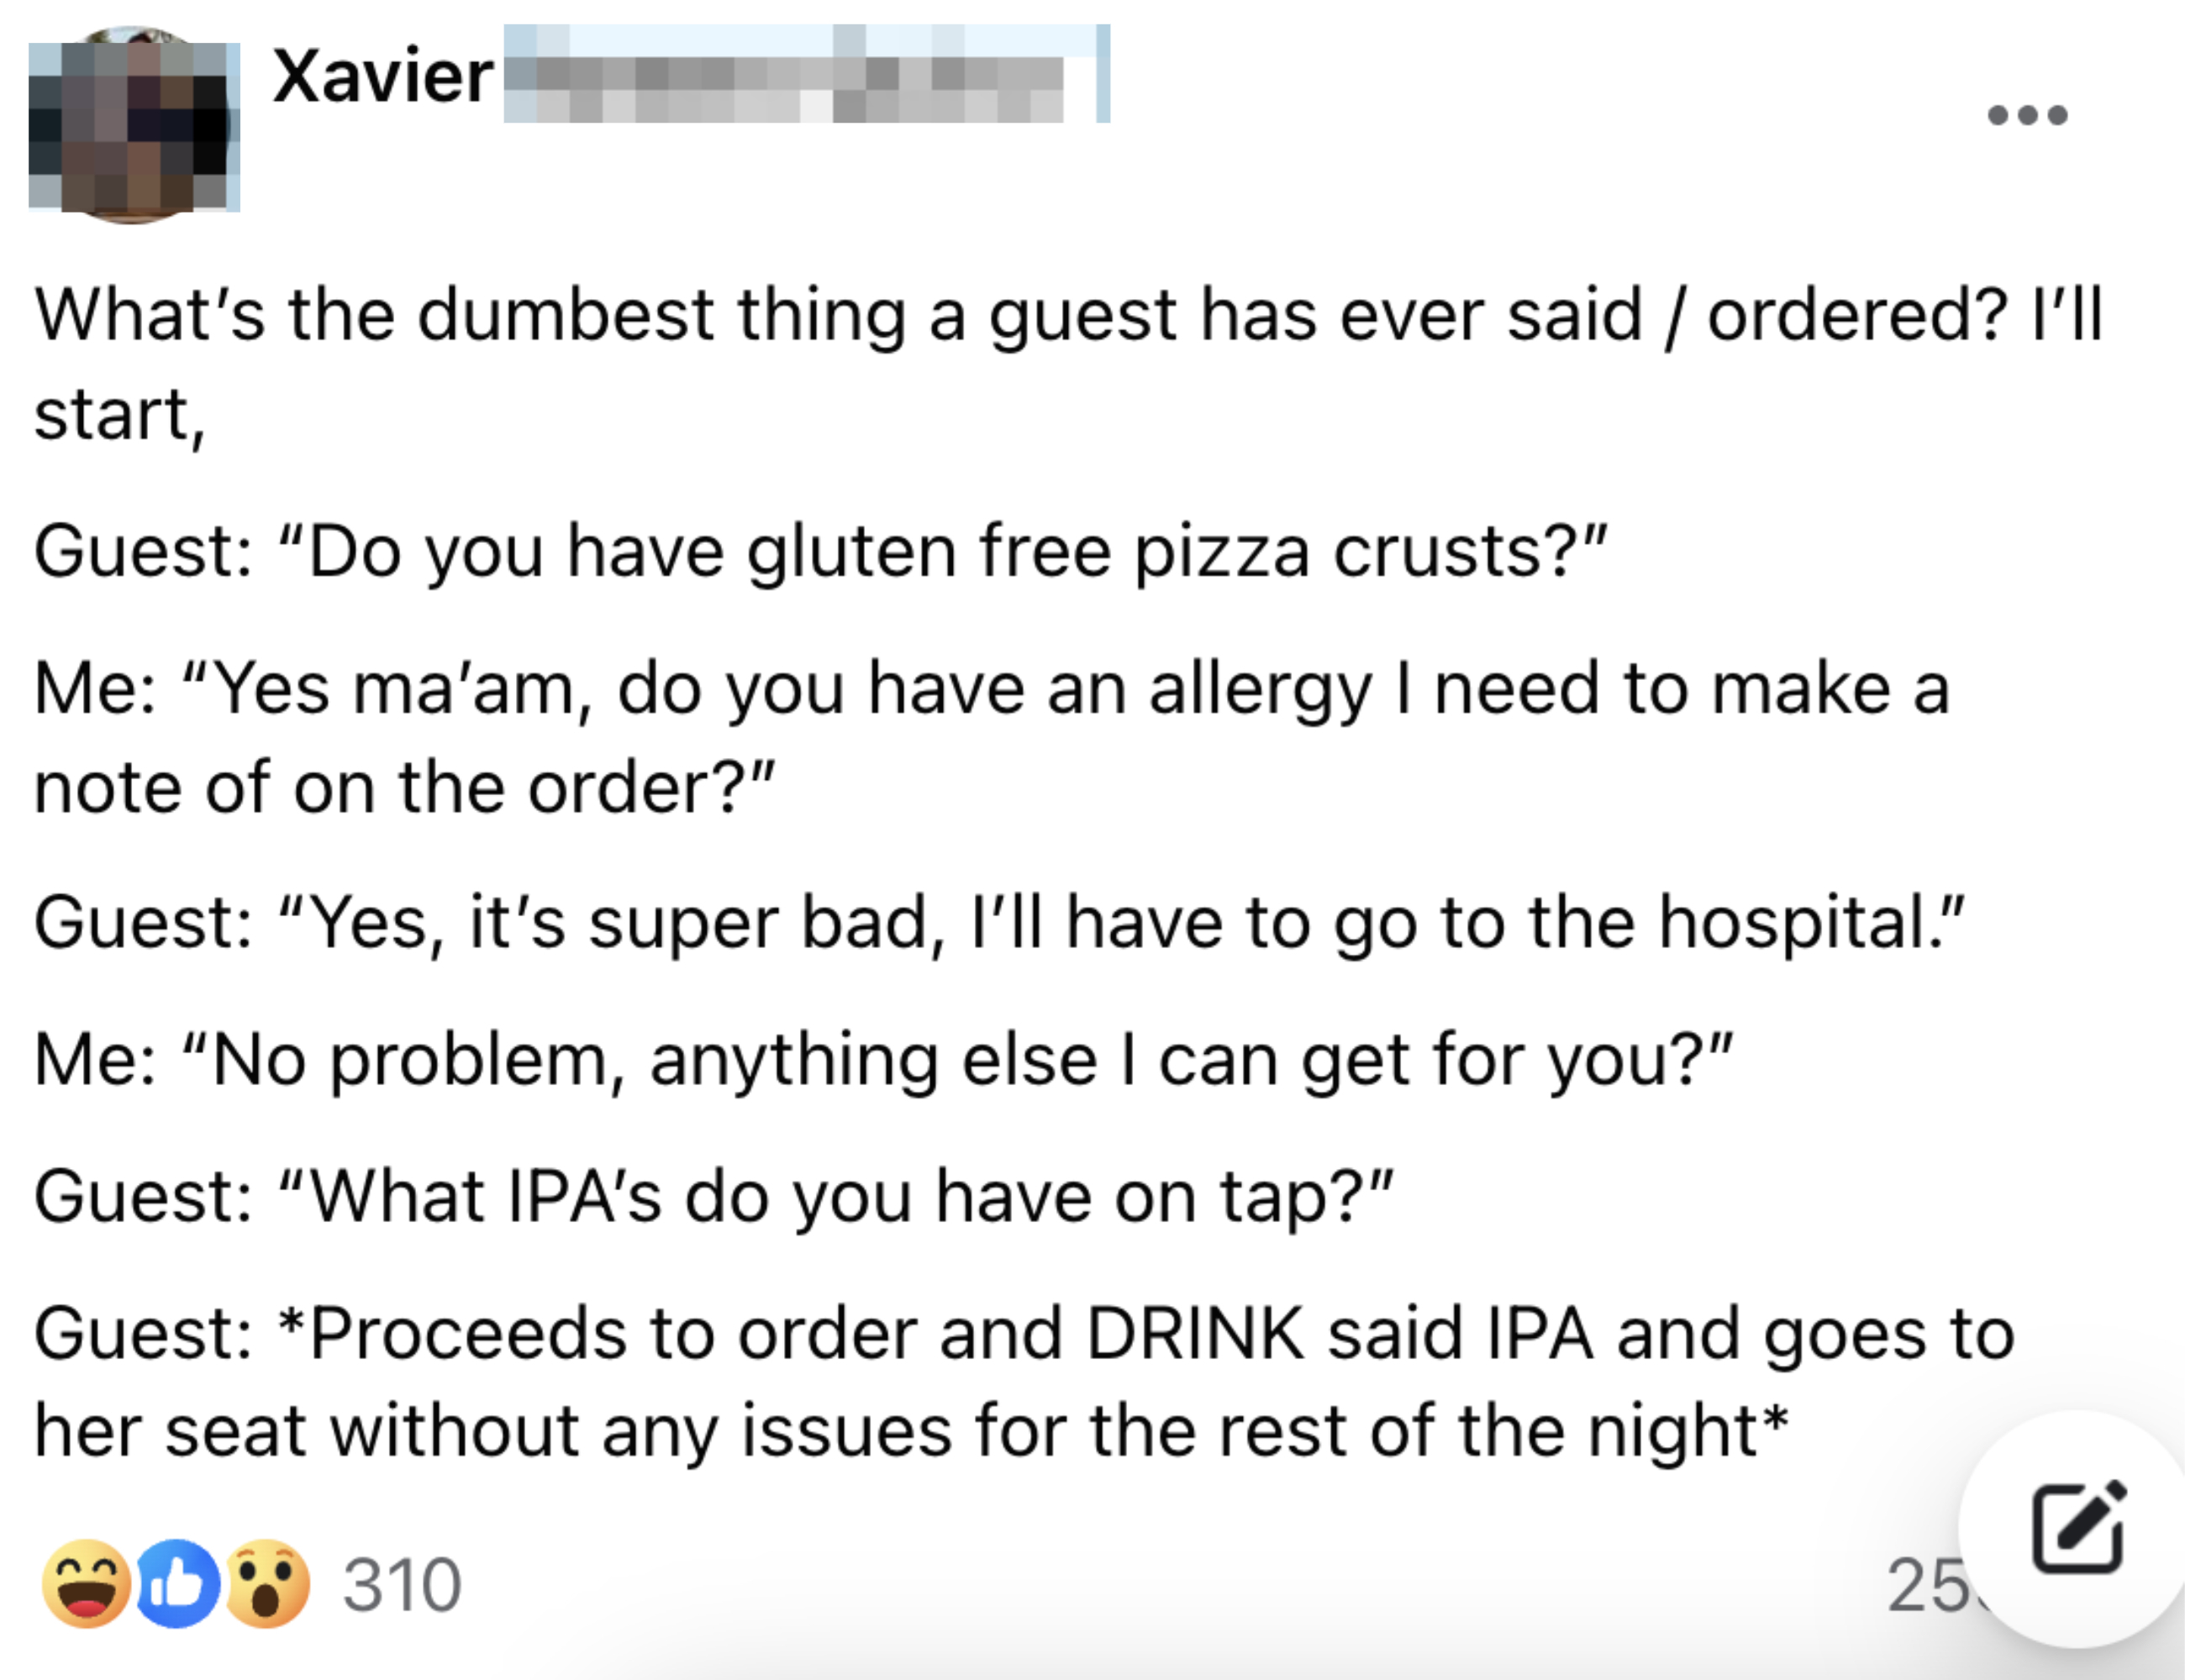 Post sharing a humorous exchange about a guest&#x27;s gluten allergy and ordering an IPA beer